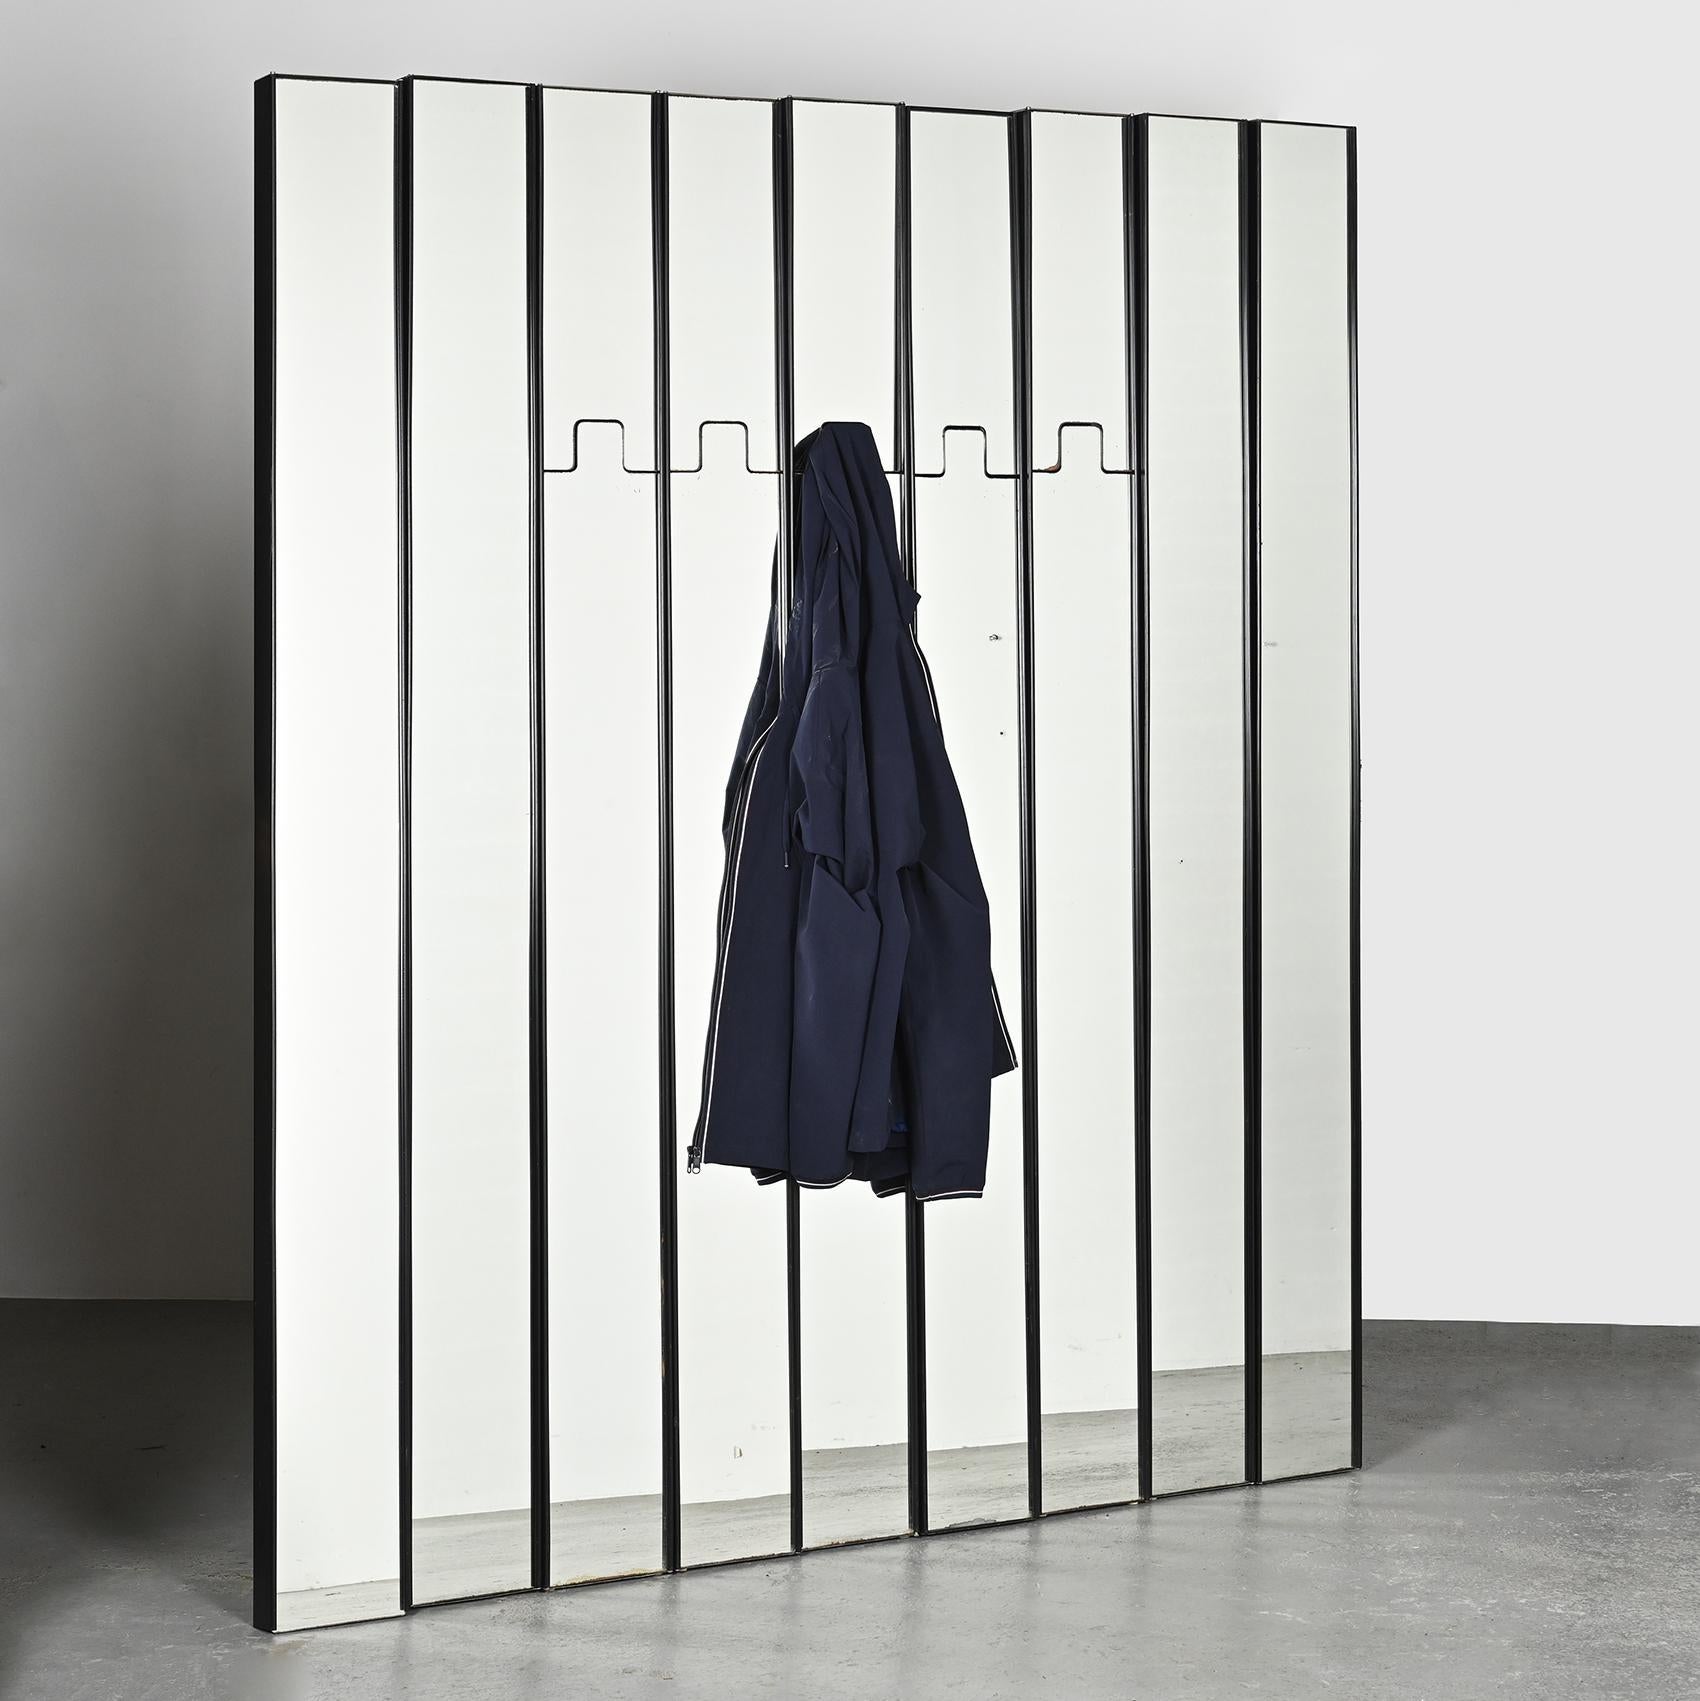 Set of nine elements from the Gronda collection, designed by Luciano BERTONCINI in the 1970s, consisting of 4 mirrors and 5 modular coat racks.

The structure of each element is made of black ABS plastic housing a mirror which, for the coat rack